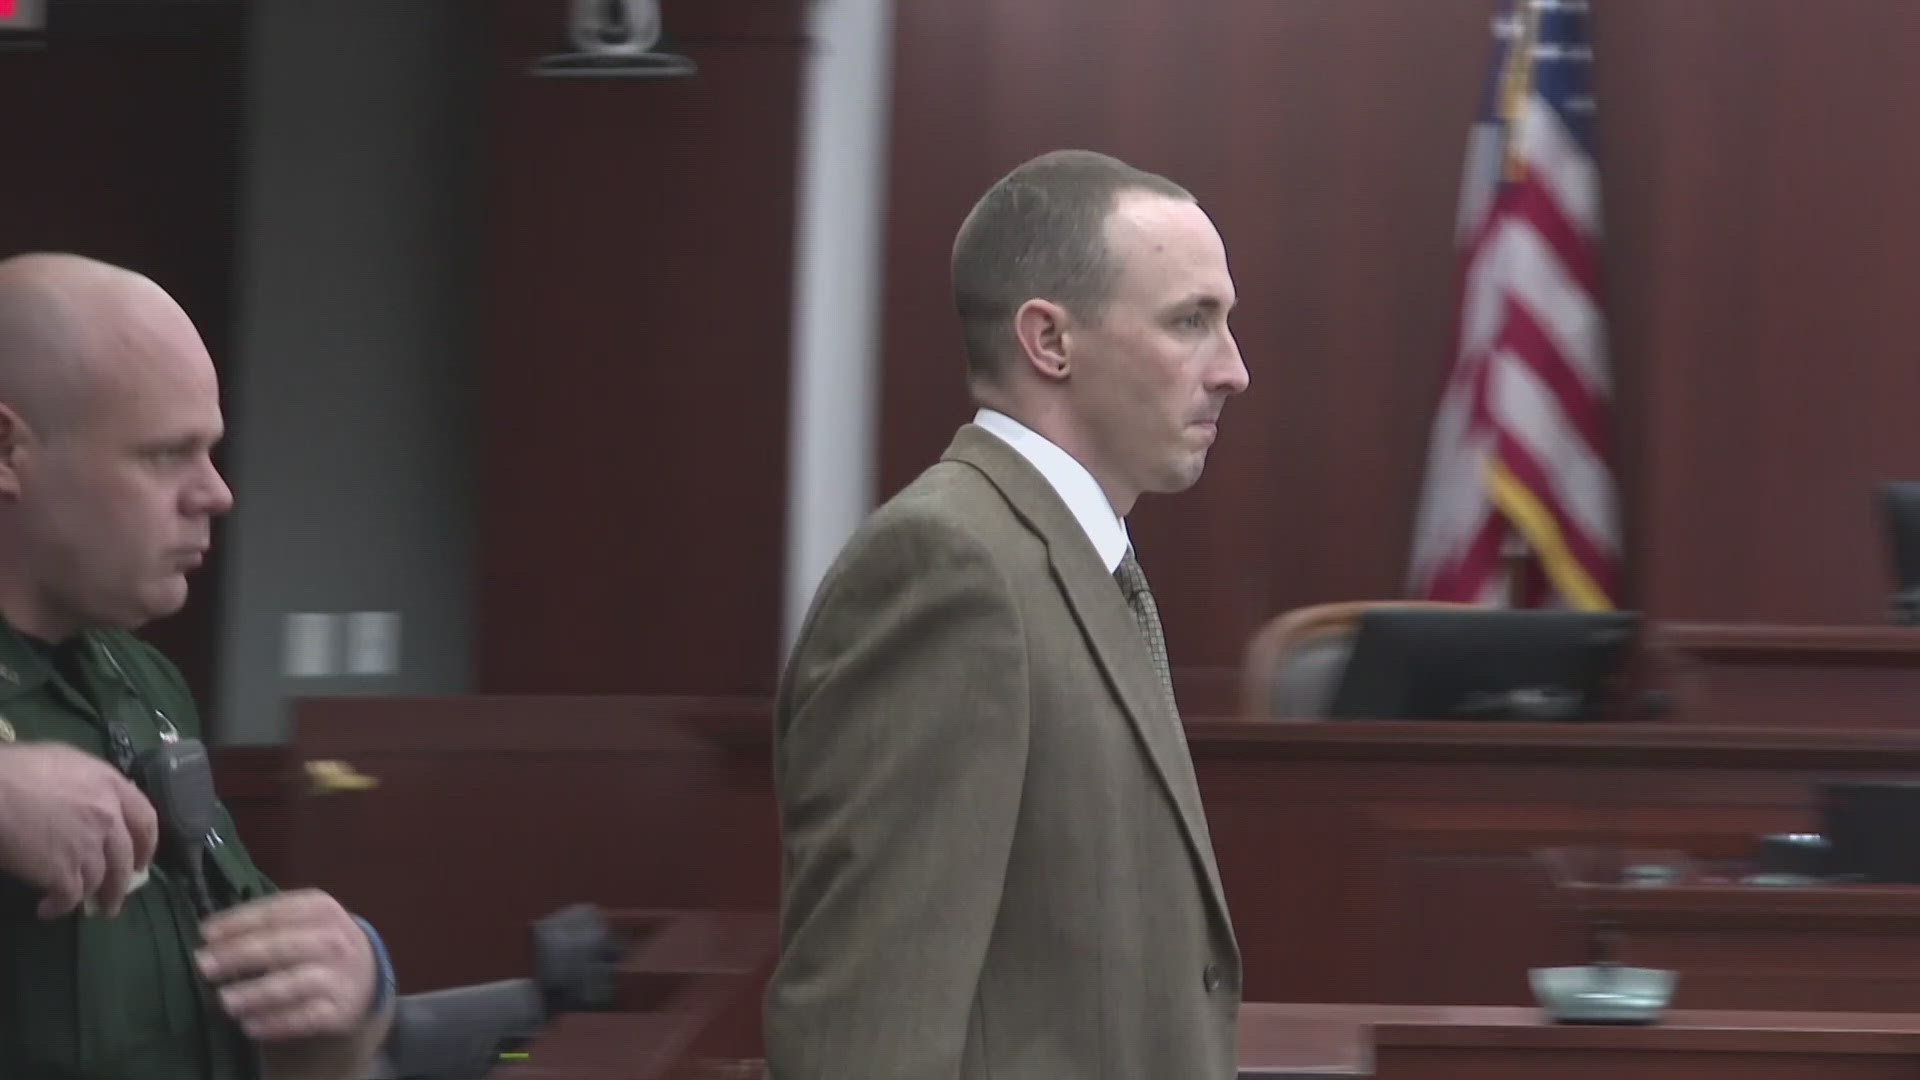 Patrick McDowell faces the death penalty for the murder of Nassau County Sheriff’s Deputy Joshua Moyers in 2021.